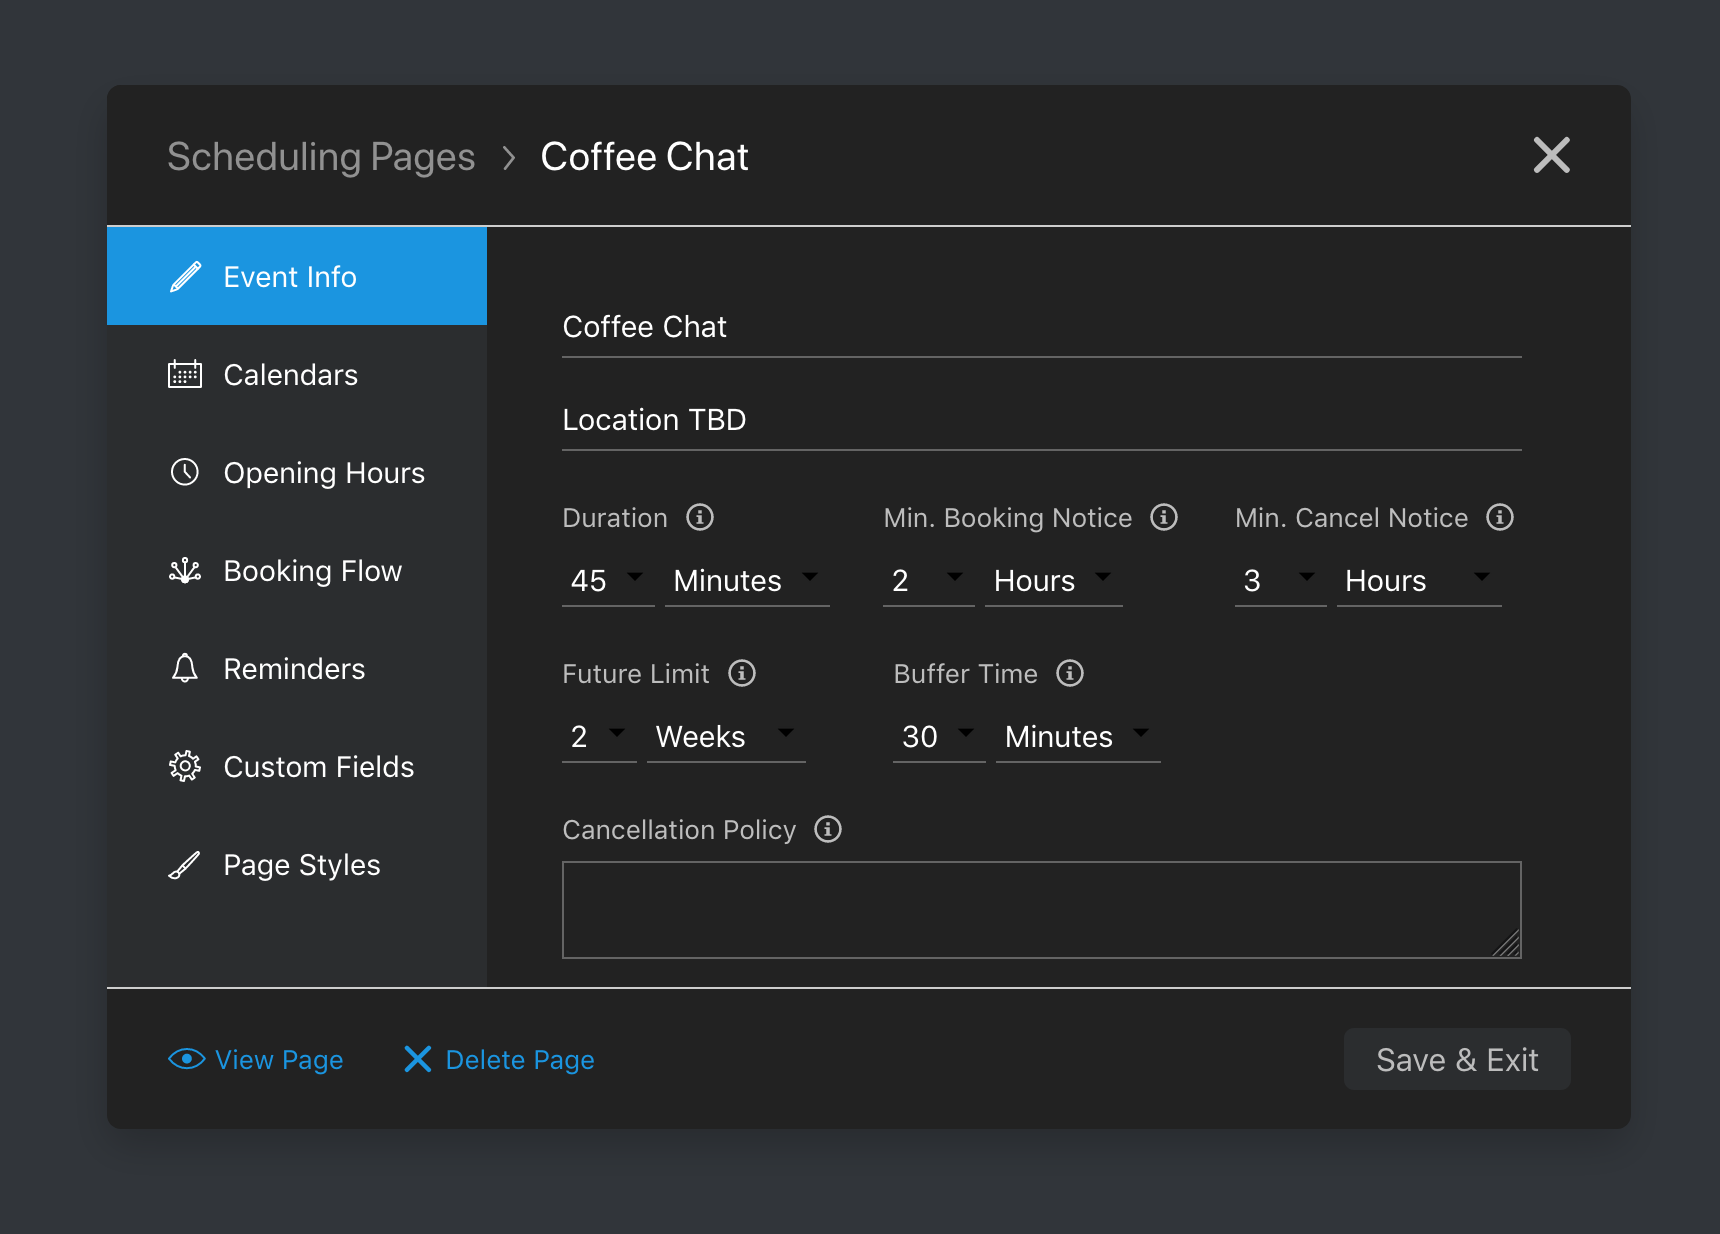 The Nylas Schedule Editor showing the event details for a coffee chat. The event details are filled in with demo information. The Editor is using the Dark Mode color scheme.